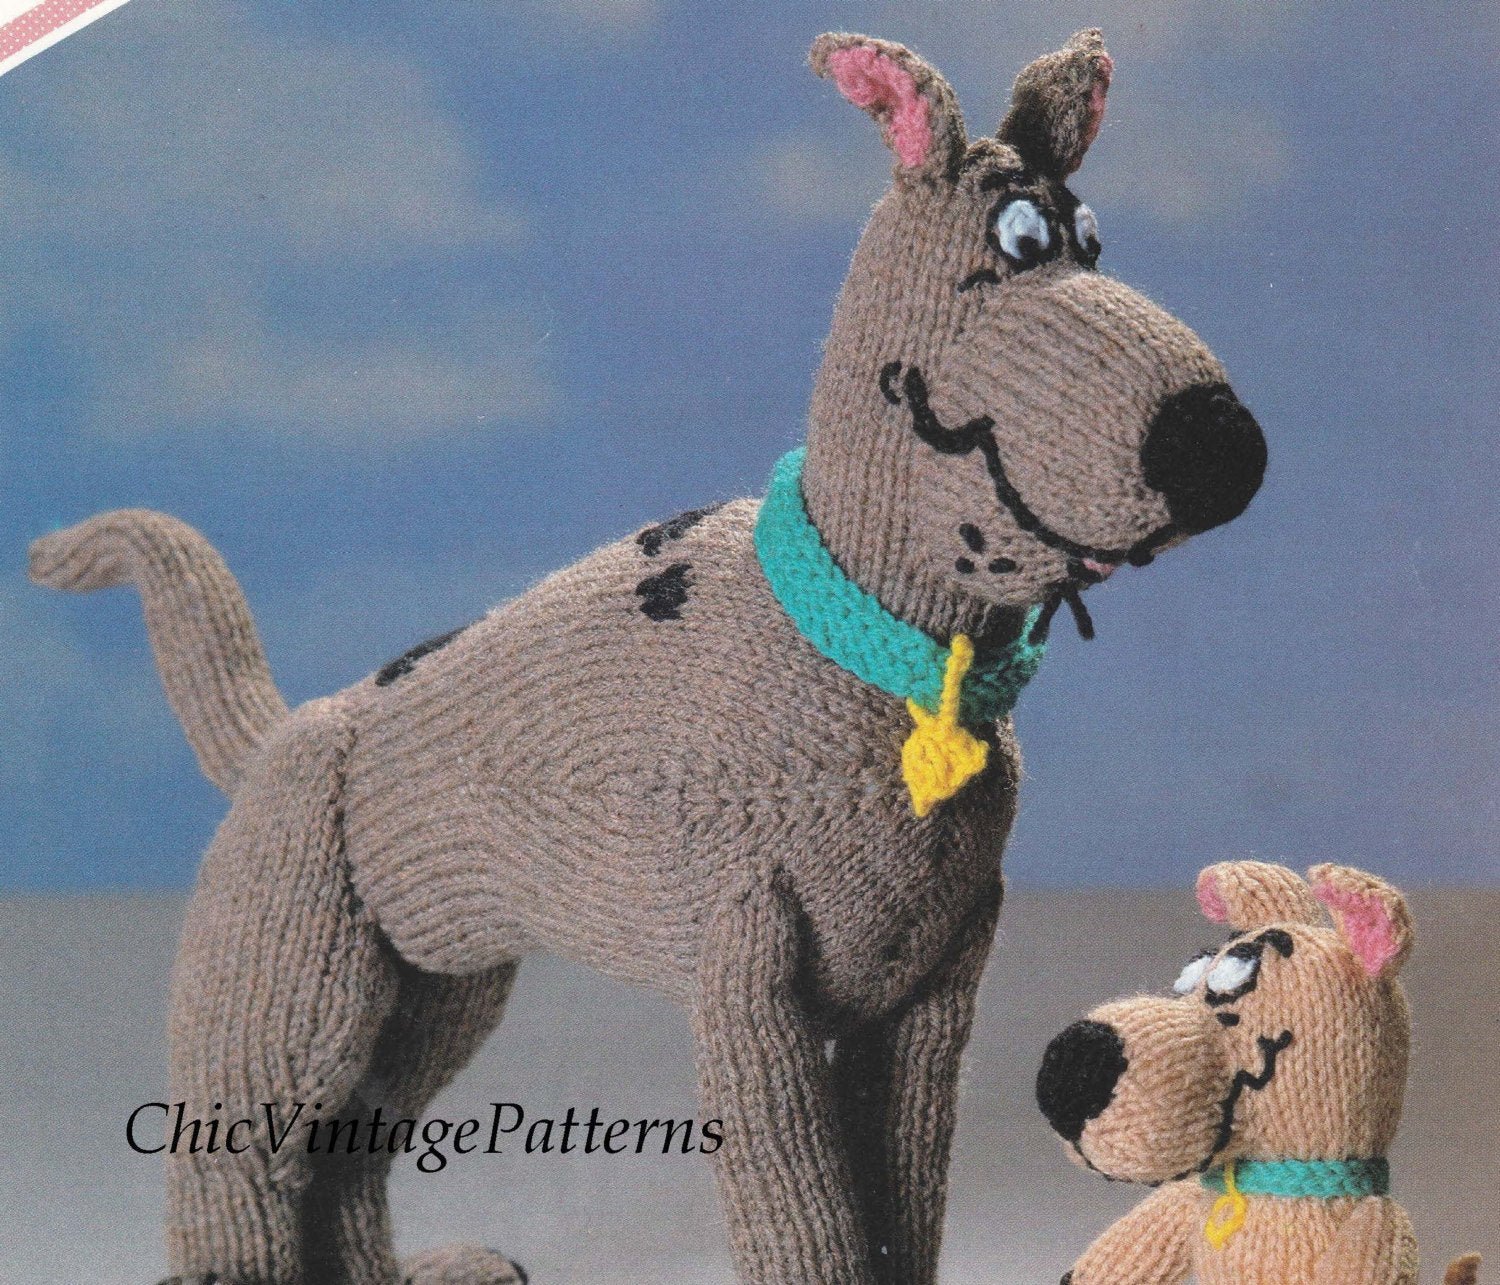 Scooby Doo Knitting Pattern, Soft Toy Scooby and Scrappy Doo, PDF Knitting Pattern